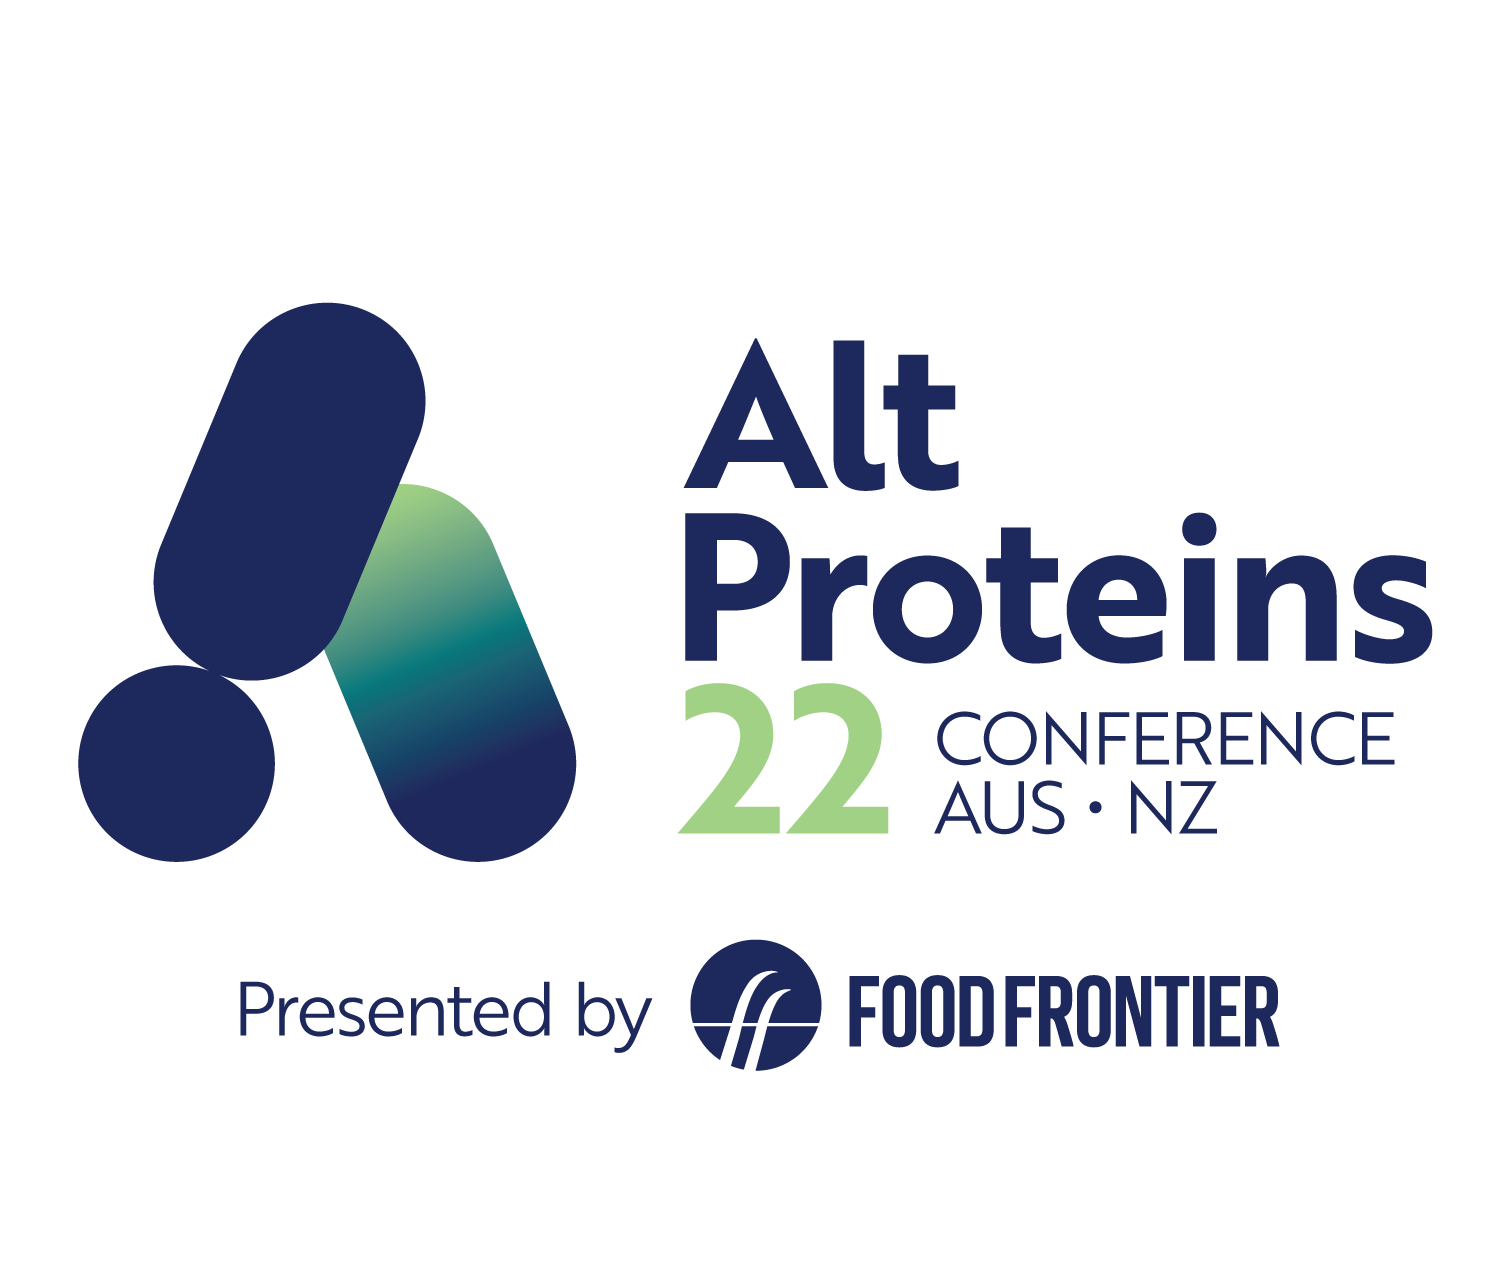 AltProteins 22 conference postponed to May